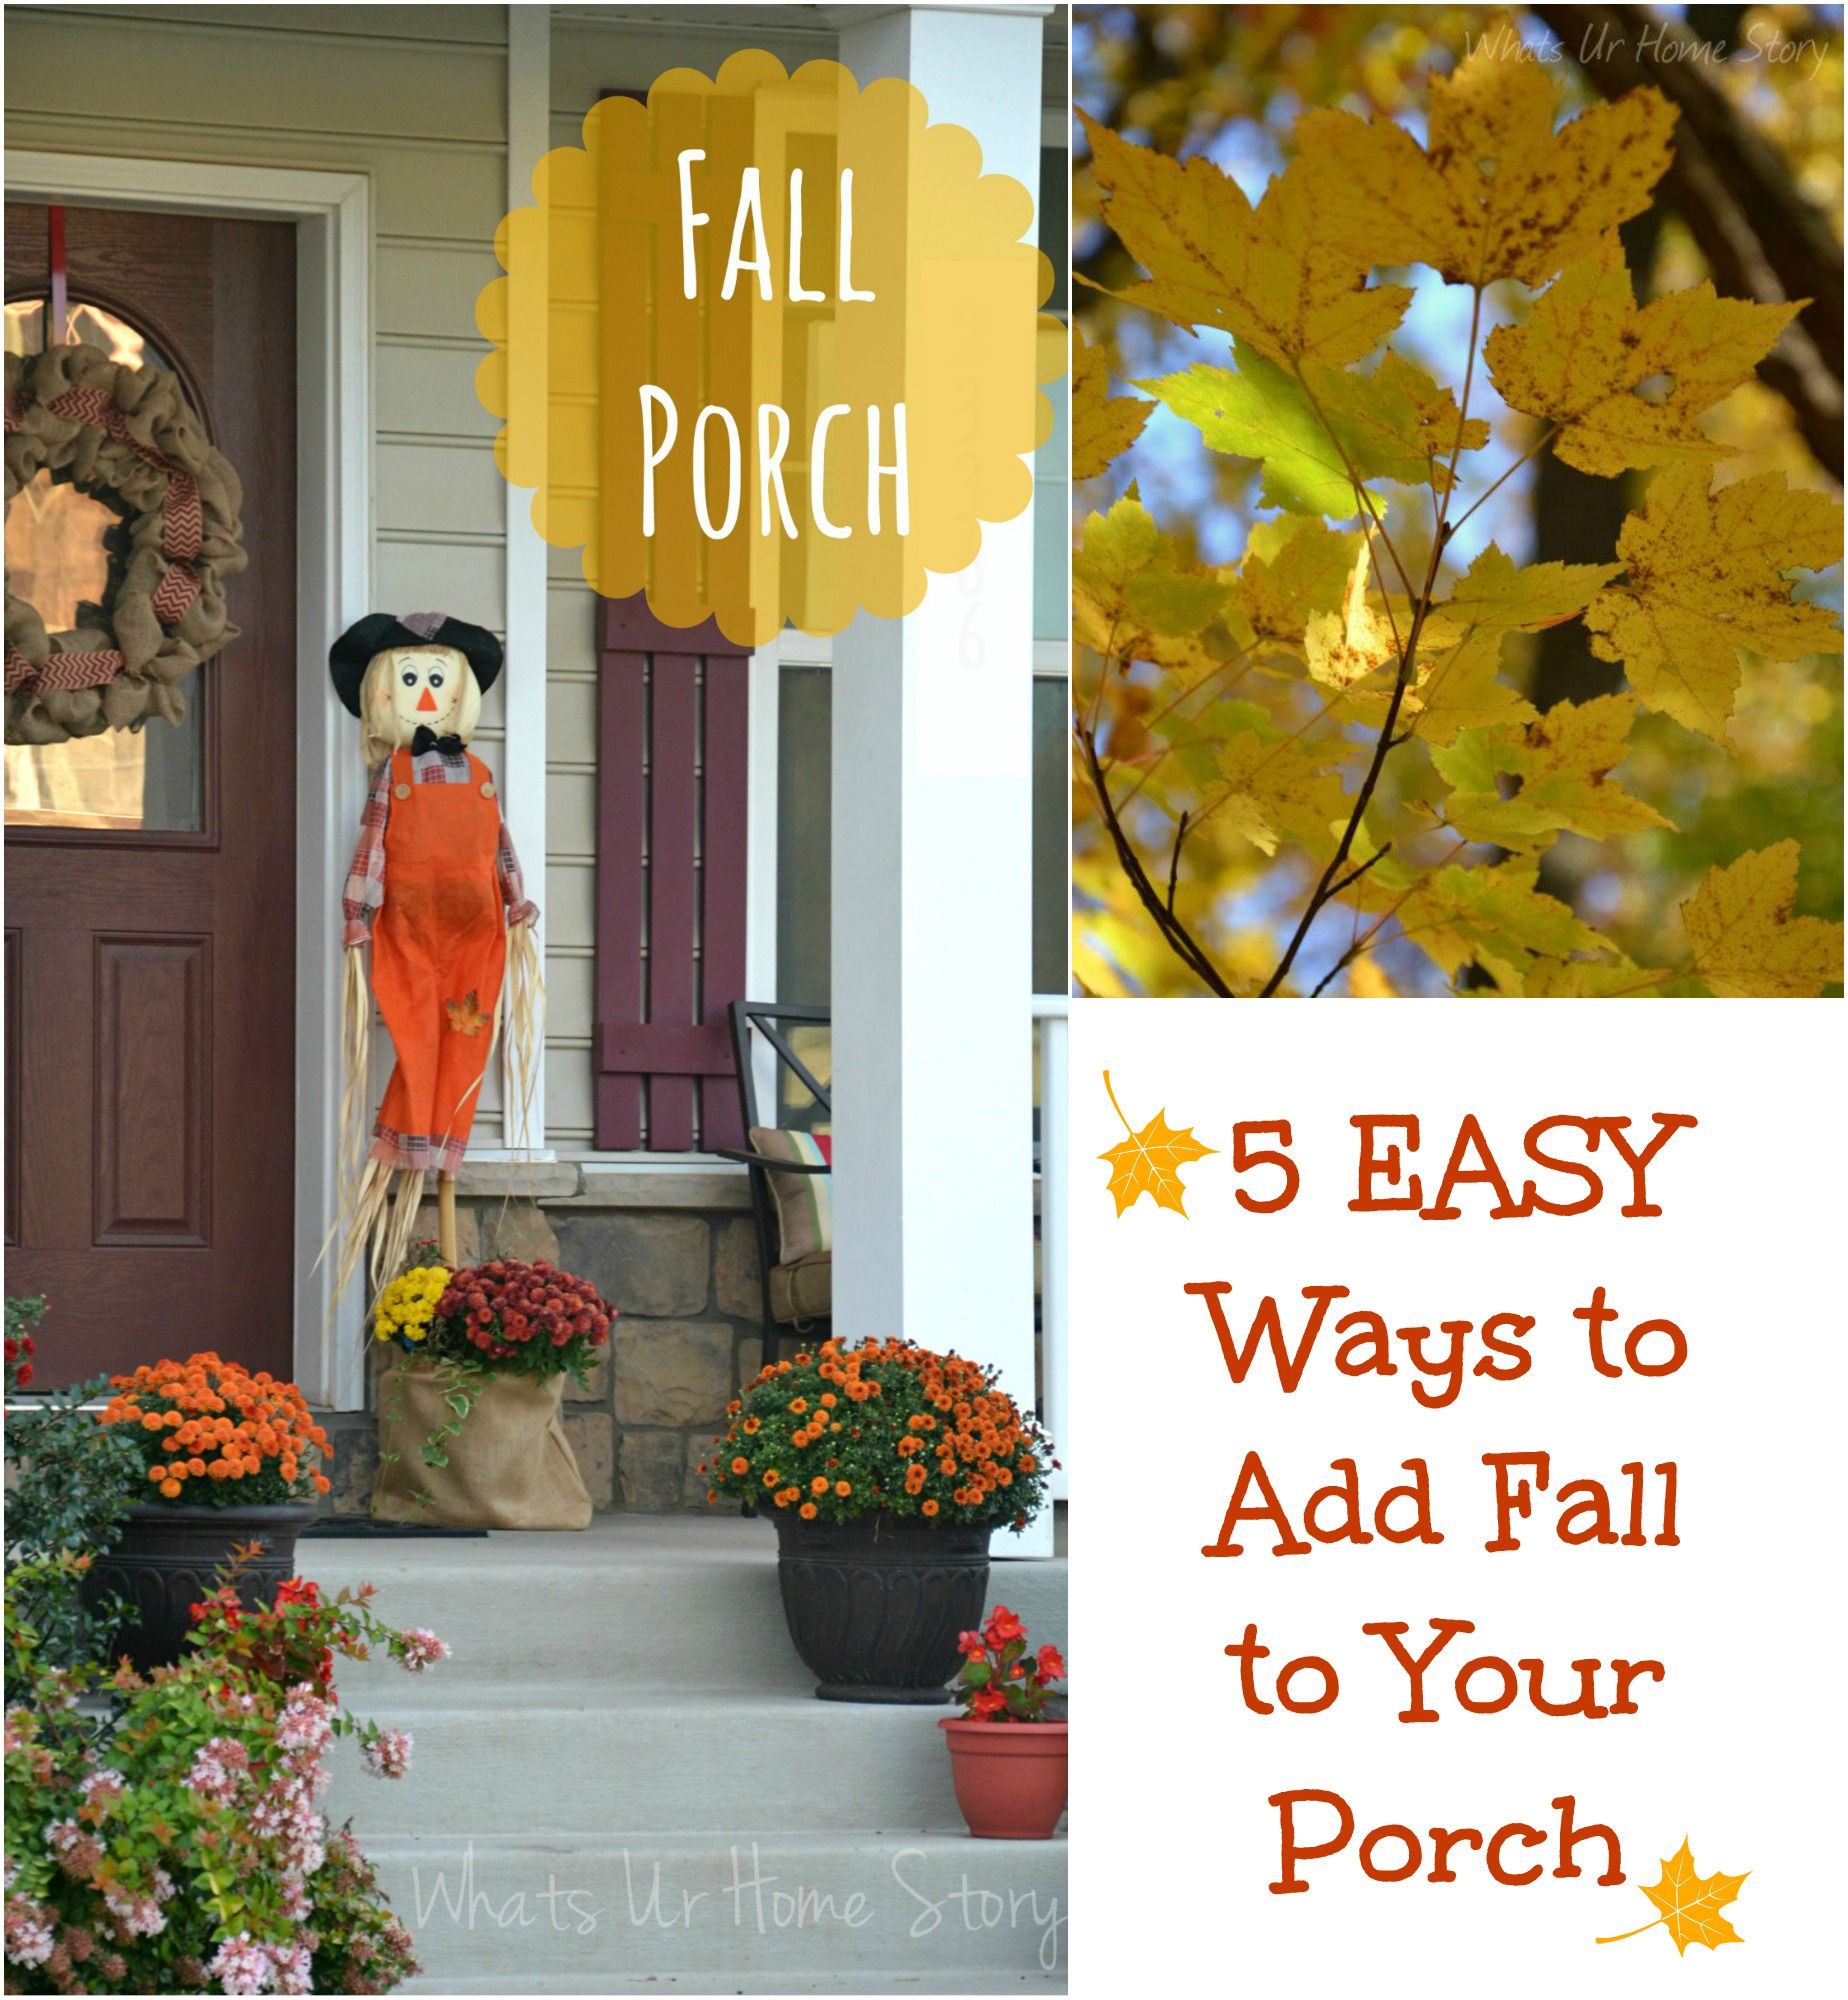 Easy ways to add Fall to your porch